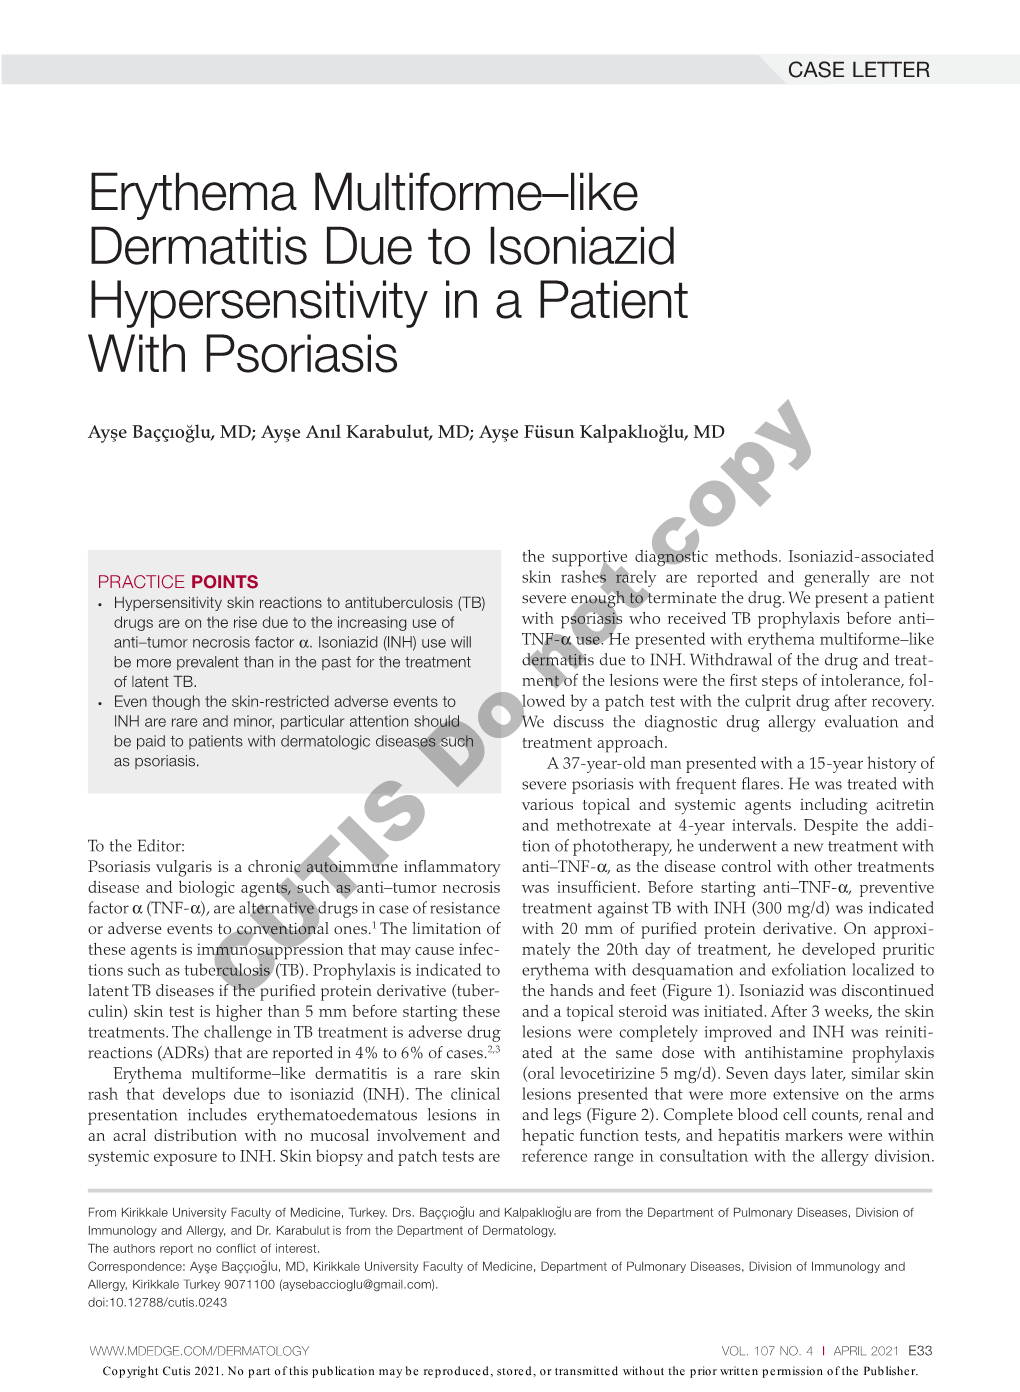 Erythema Multiforme–Like Dermatitis Due to Isoniazid Hypersensitivity in a Patient with Psoriasis